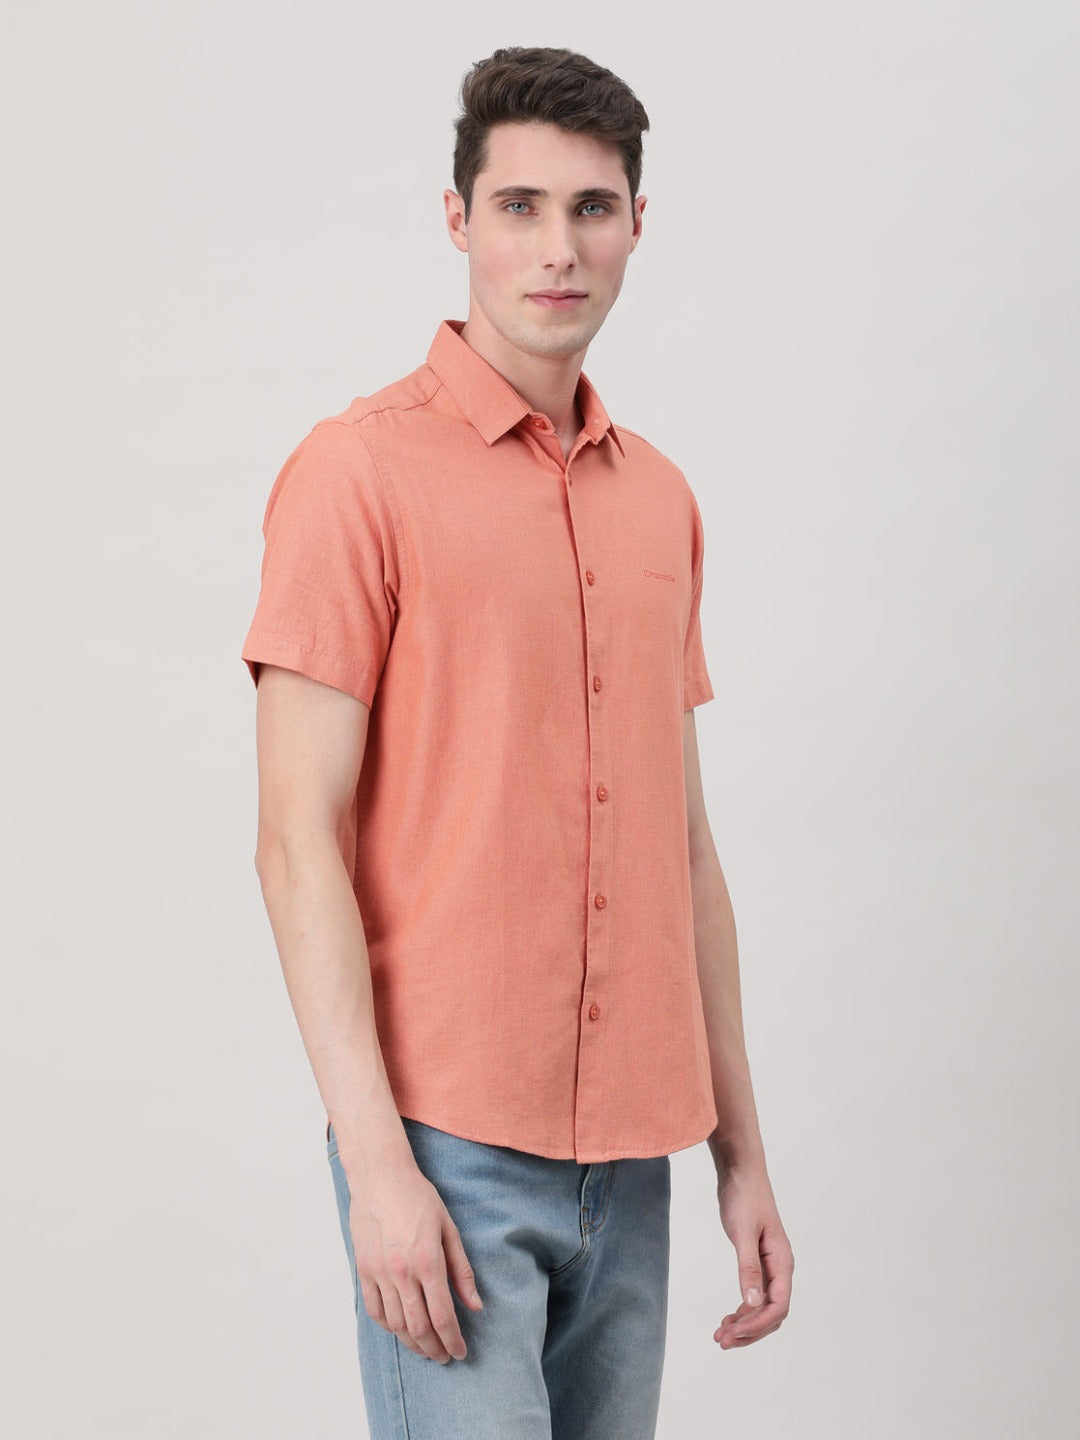 Casual Peach Half Sleeve Comfort Fit Solid Shirt with Collar for Men